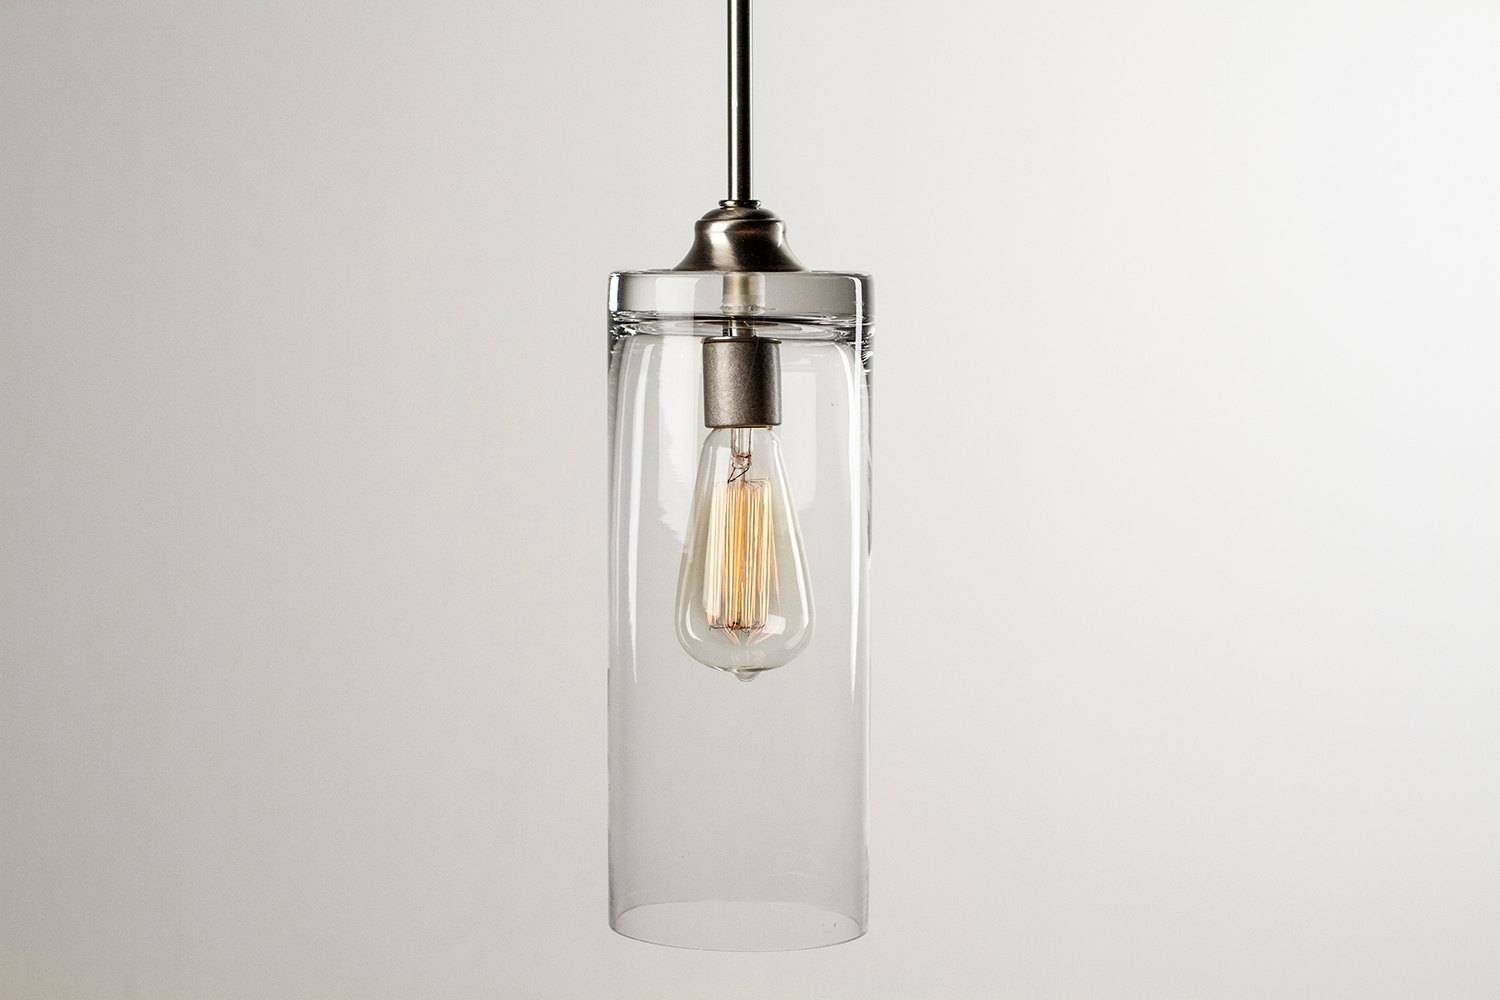 Pendant Light Fixture | Edison Bulb | Brushed Nickel | Cylinder Intended For Glass Pendant Lights With Edison Bulbs (View 7 of 15)